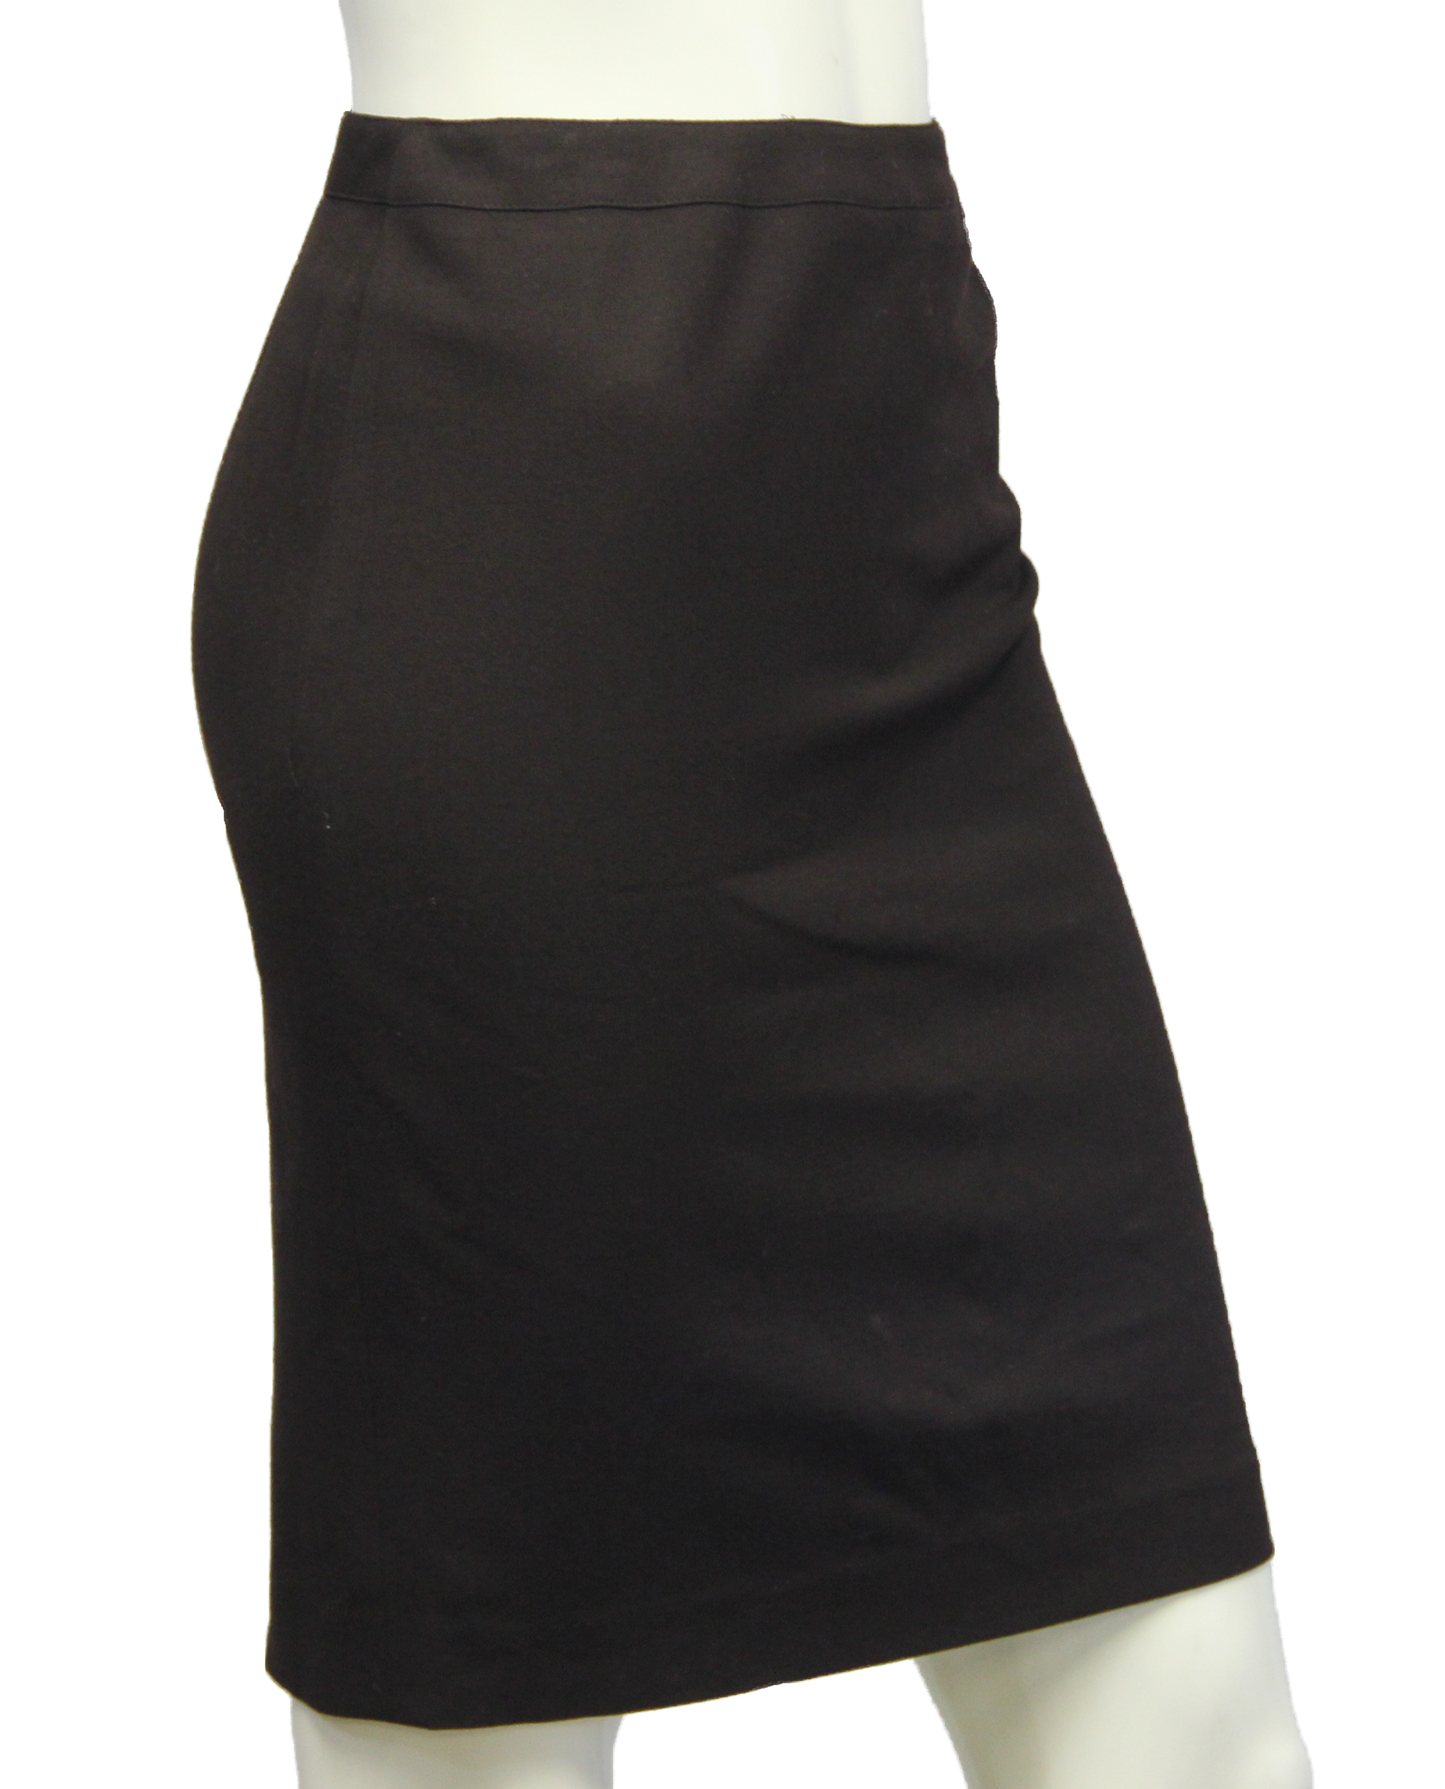 Load image into Gallery viewer, Ellen Tracy Work It Brown Skirt Size 2p (SKU 000094) - Designers On A Dime - 2
